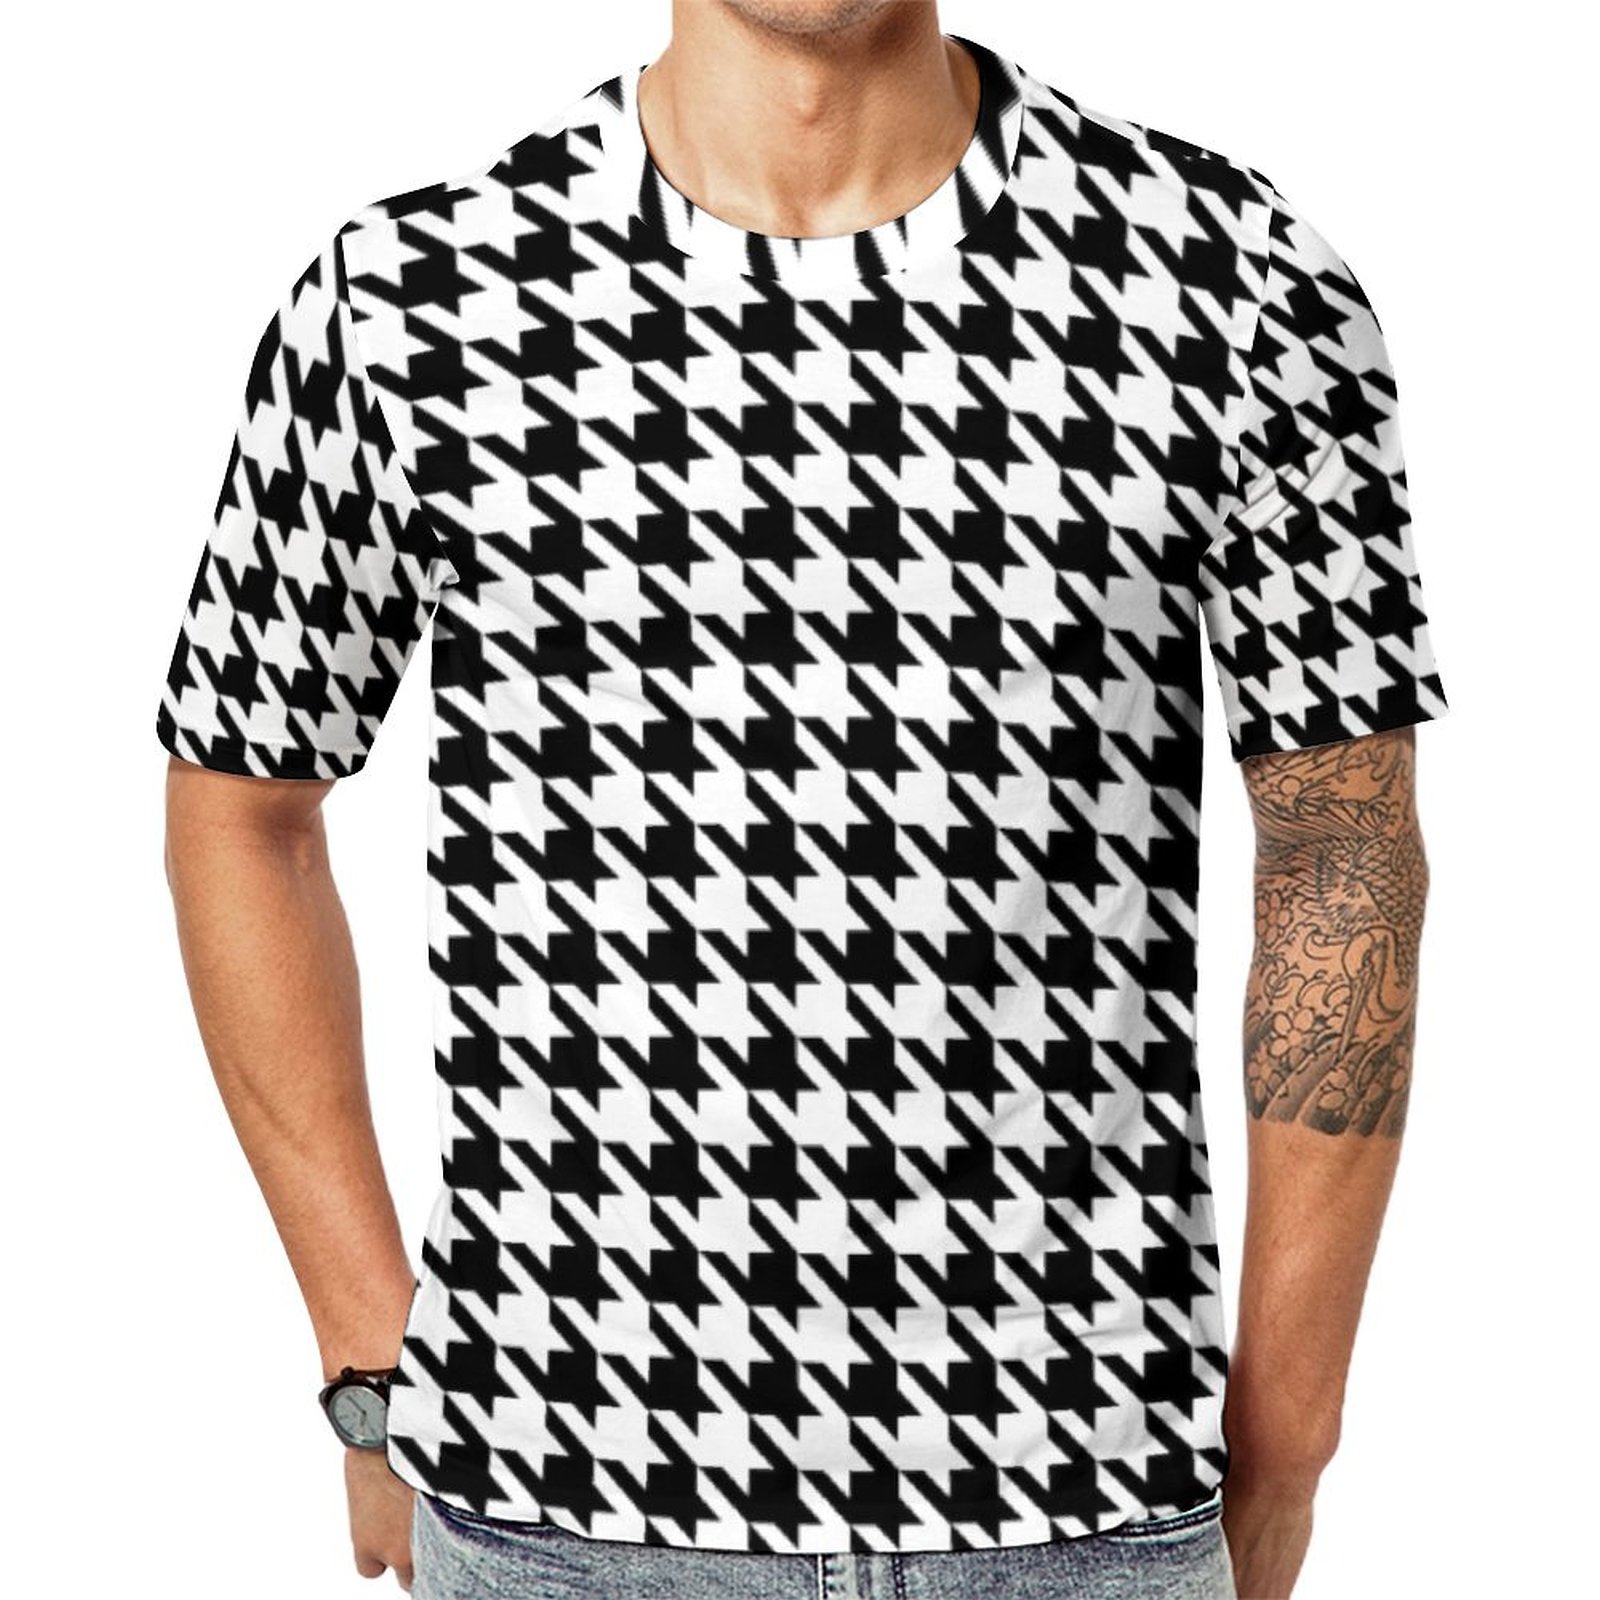 Black And White Houndstooth Print Short Sleeve Print Unisex Tshirt Summer Casual Tees for Men and Women Coolcoshirts